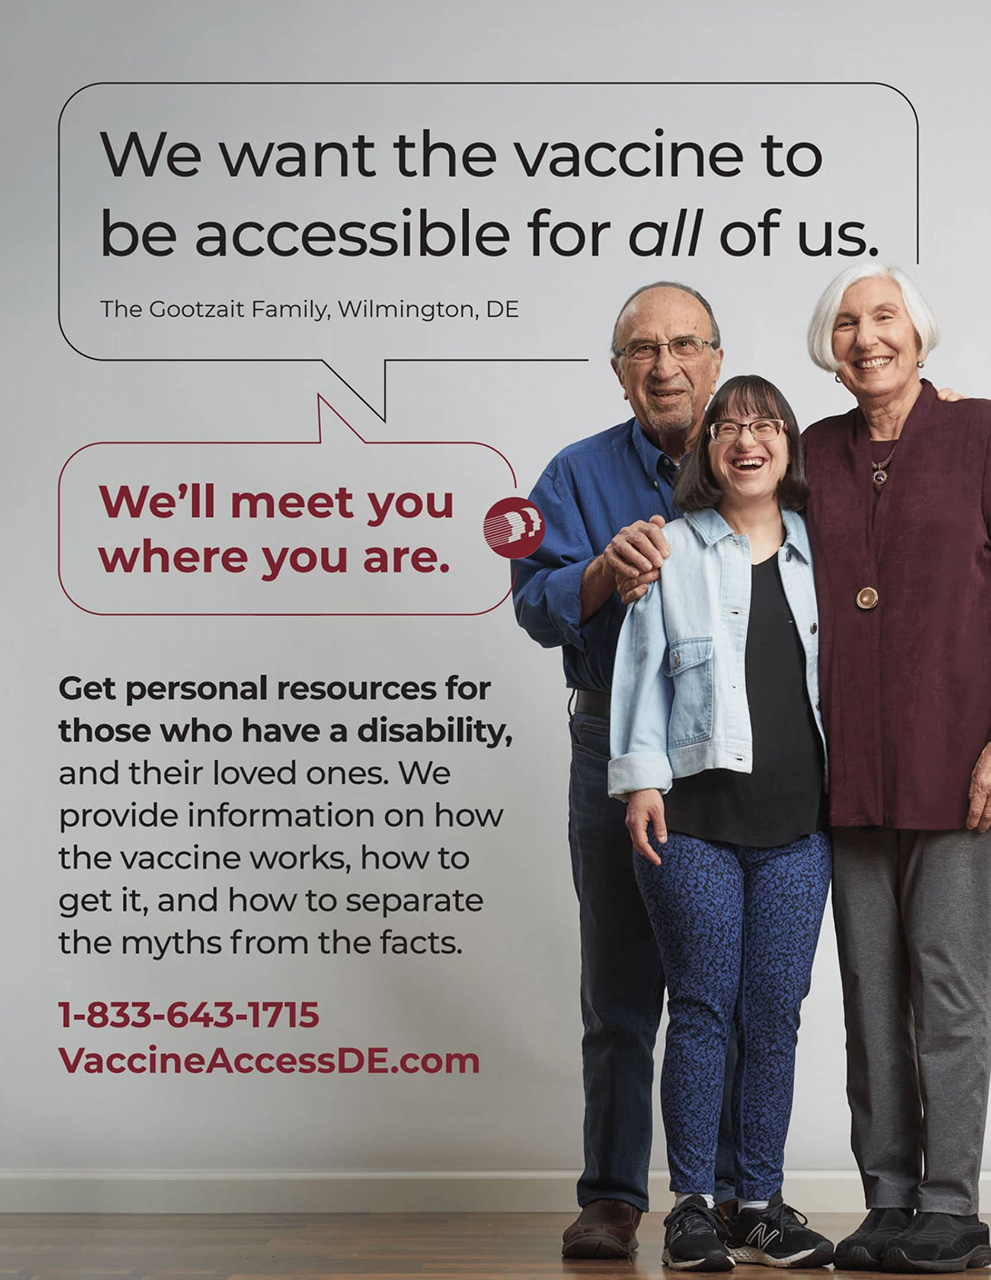 Flyer with information about vaccine access for people with disabilities